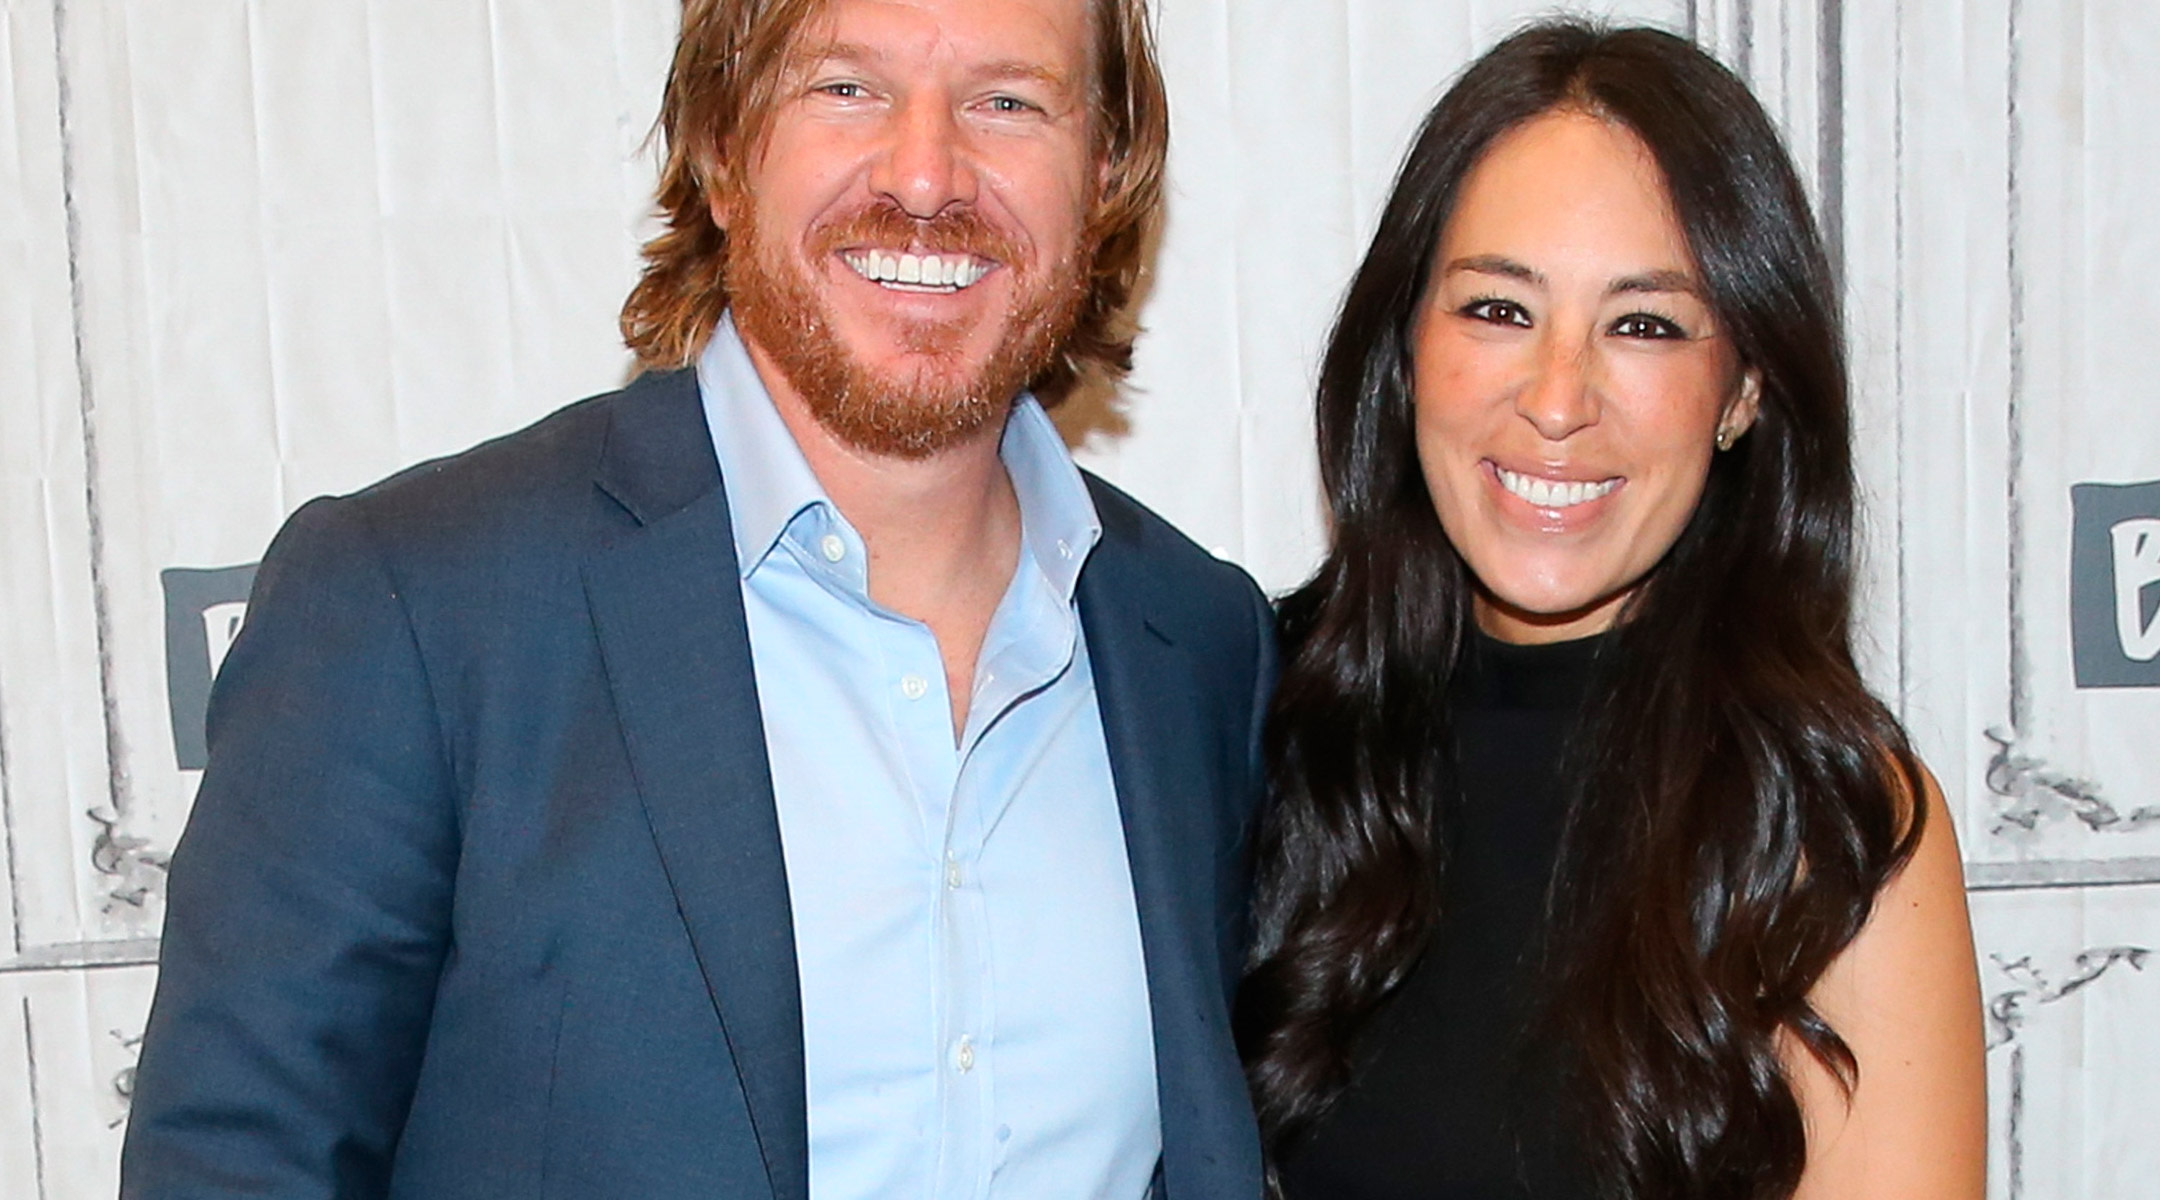 fixer upper's chip and joanna gaines speak about their surprise fifth baby